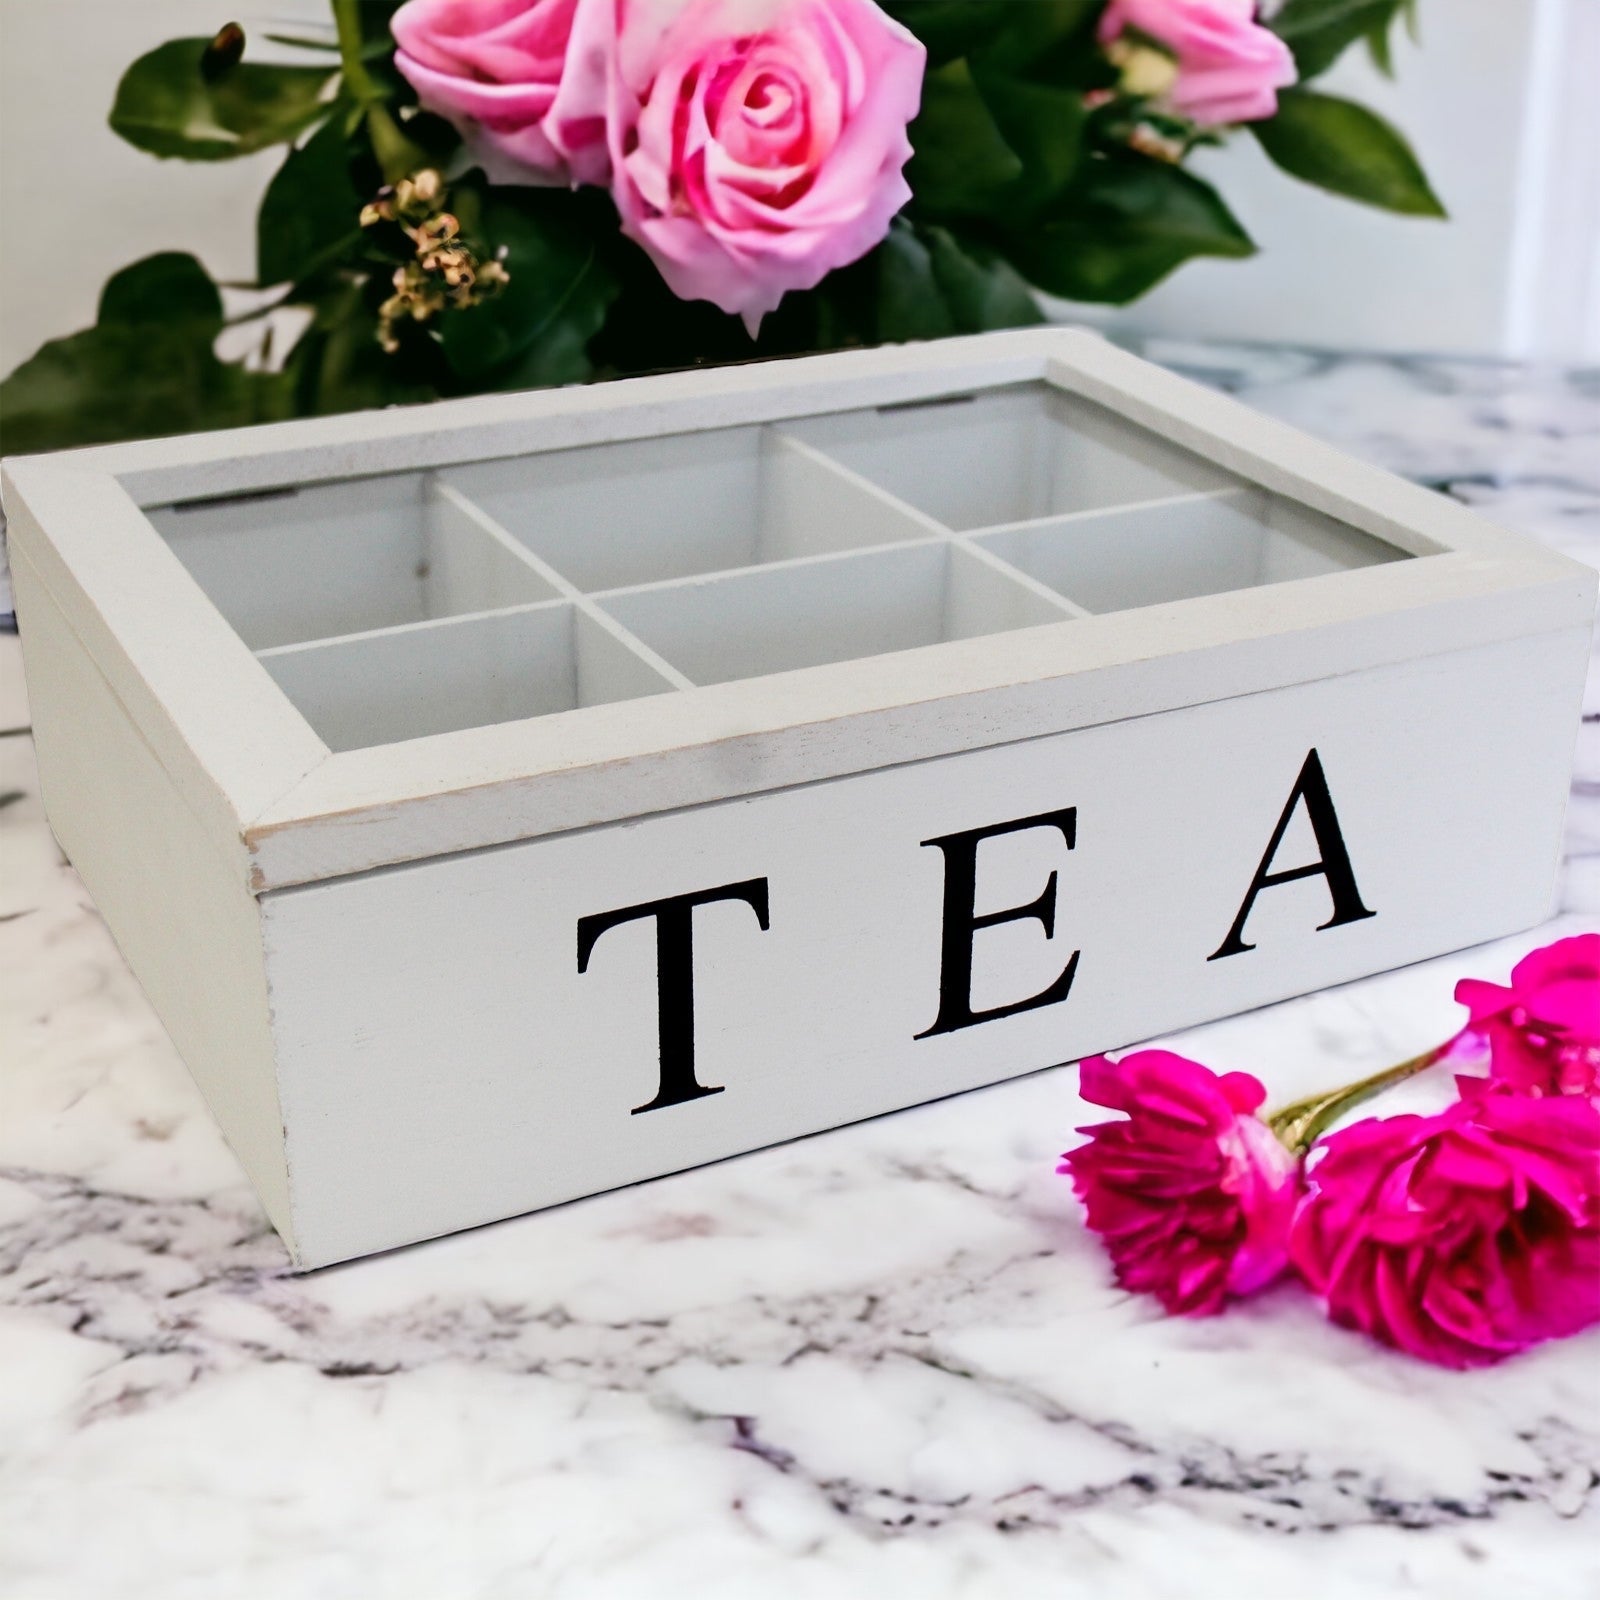 Tea Box French White Classic Med - The Renmy Store Homewares & Gifts 